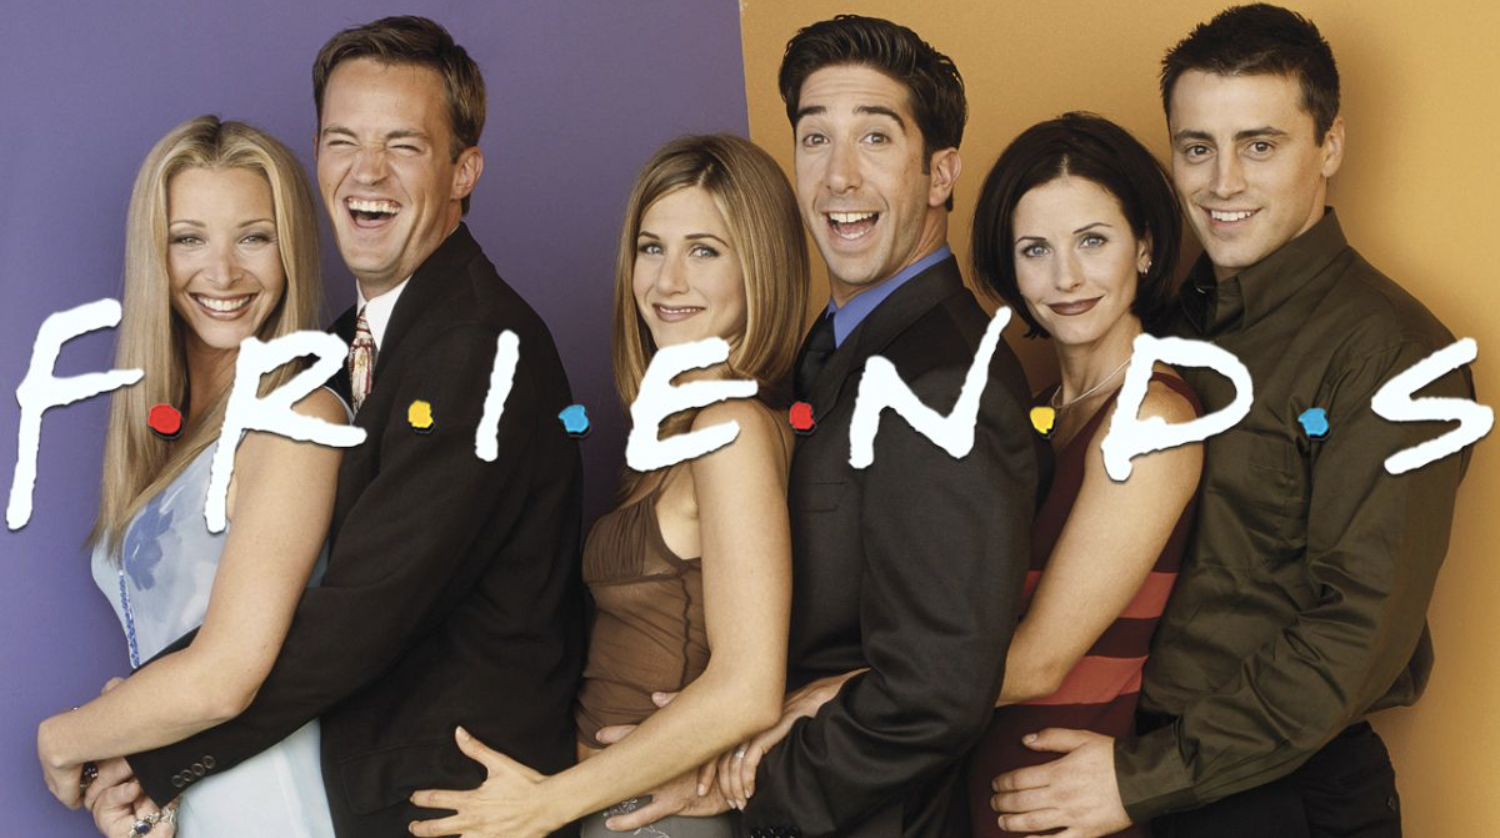 Cast members from the television show Friends pose for a publicity photograph.